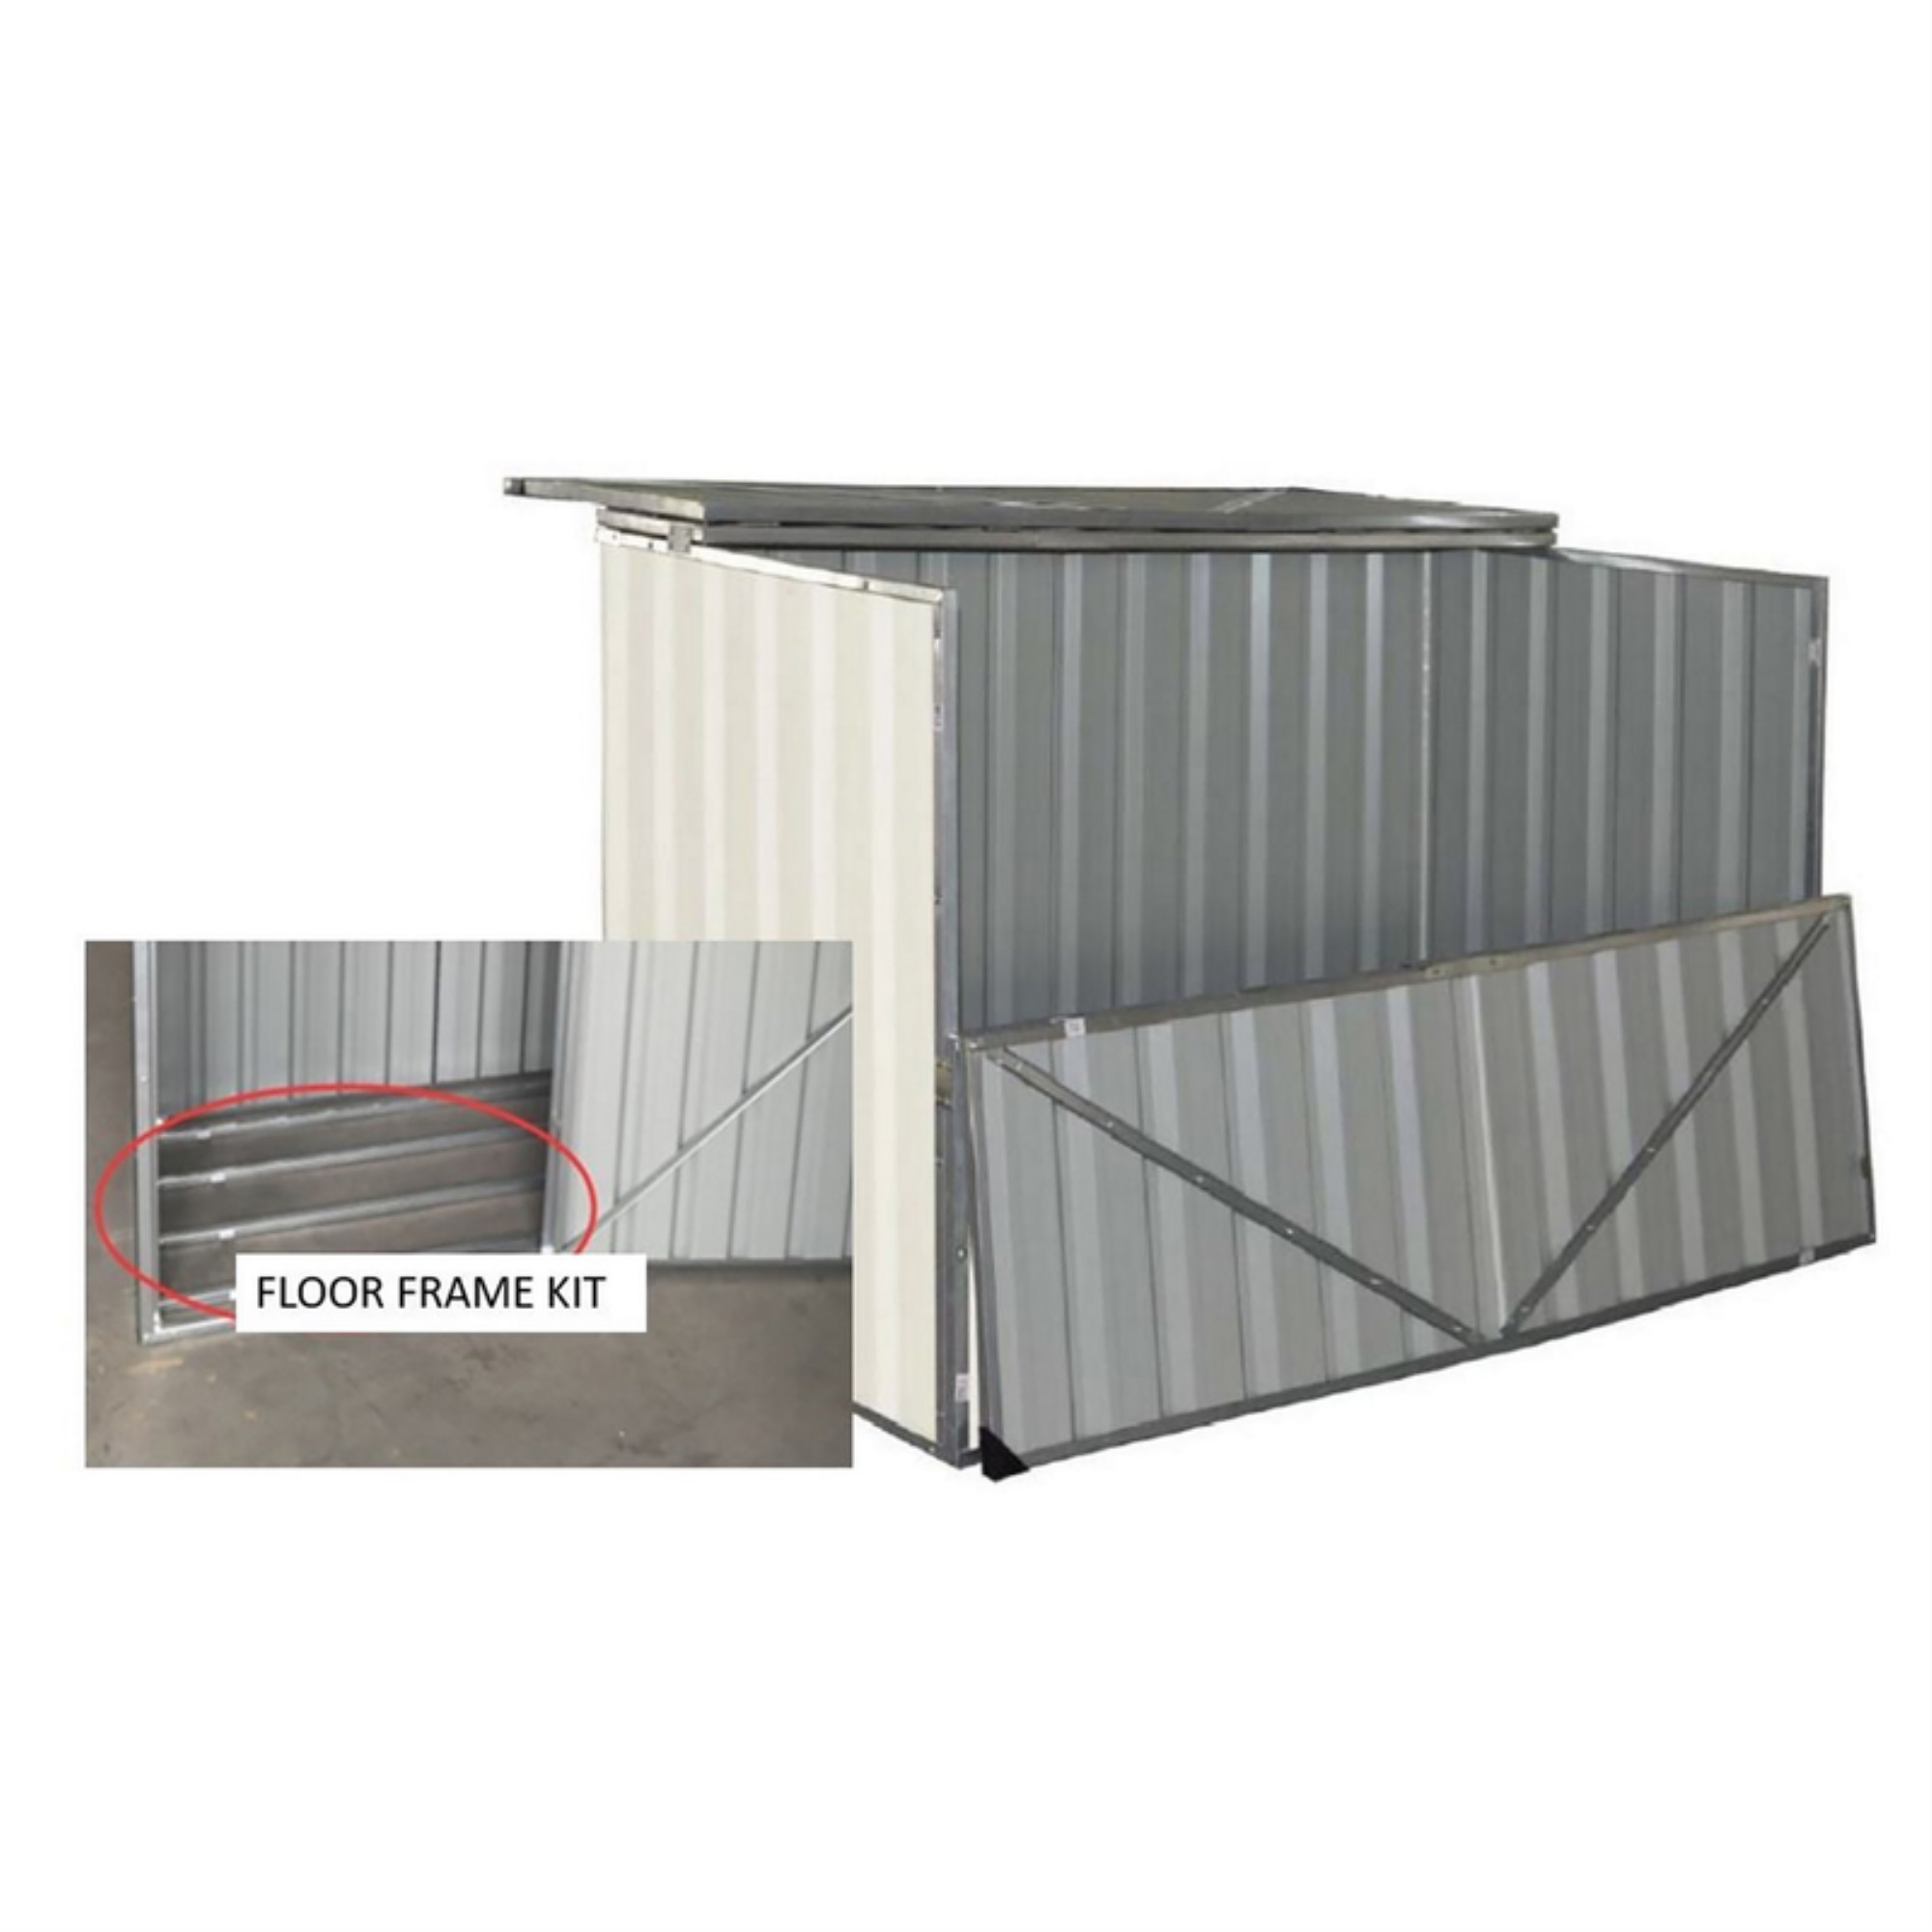 STORGE SHED W/FLOOR 4X3' - image 1 of 6